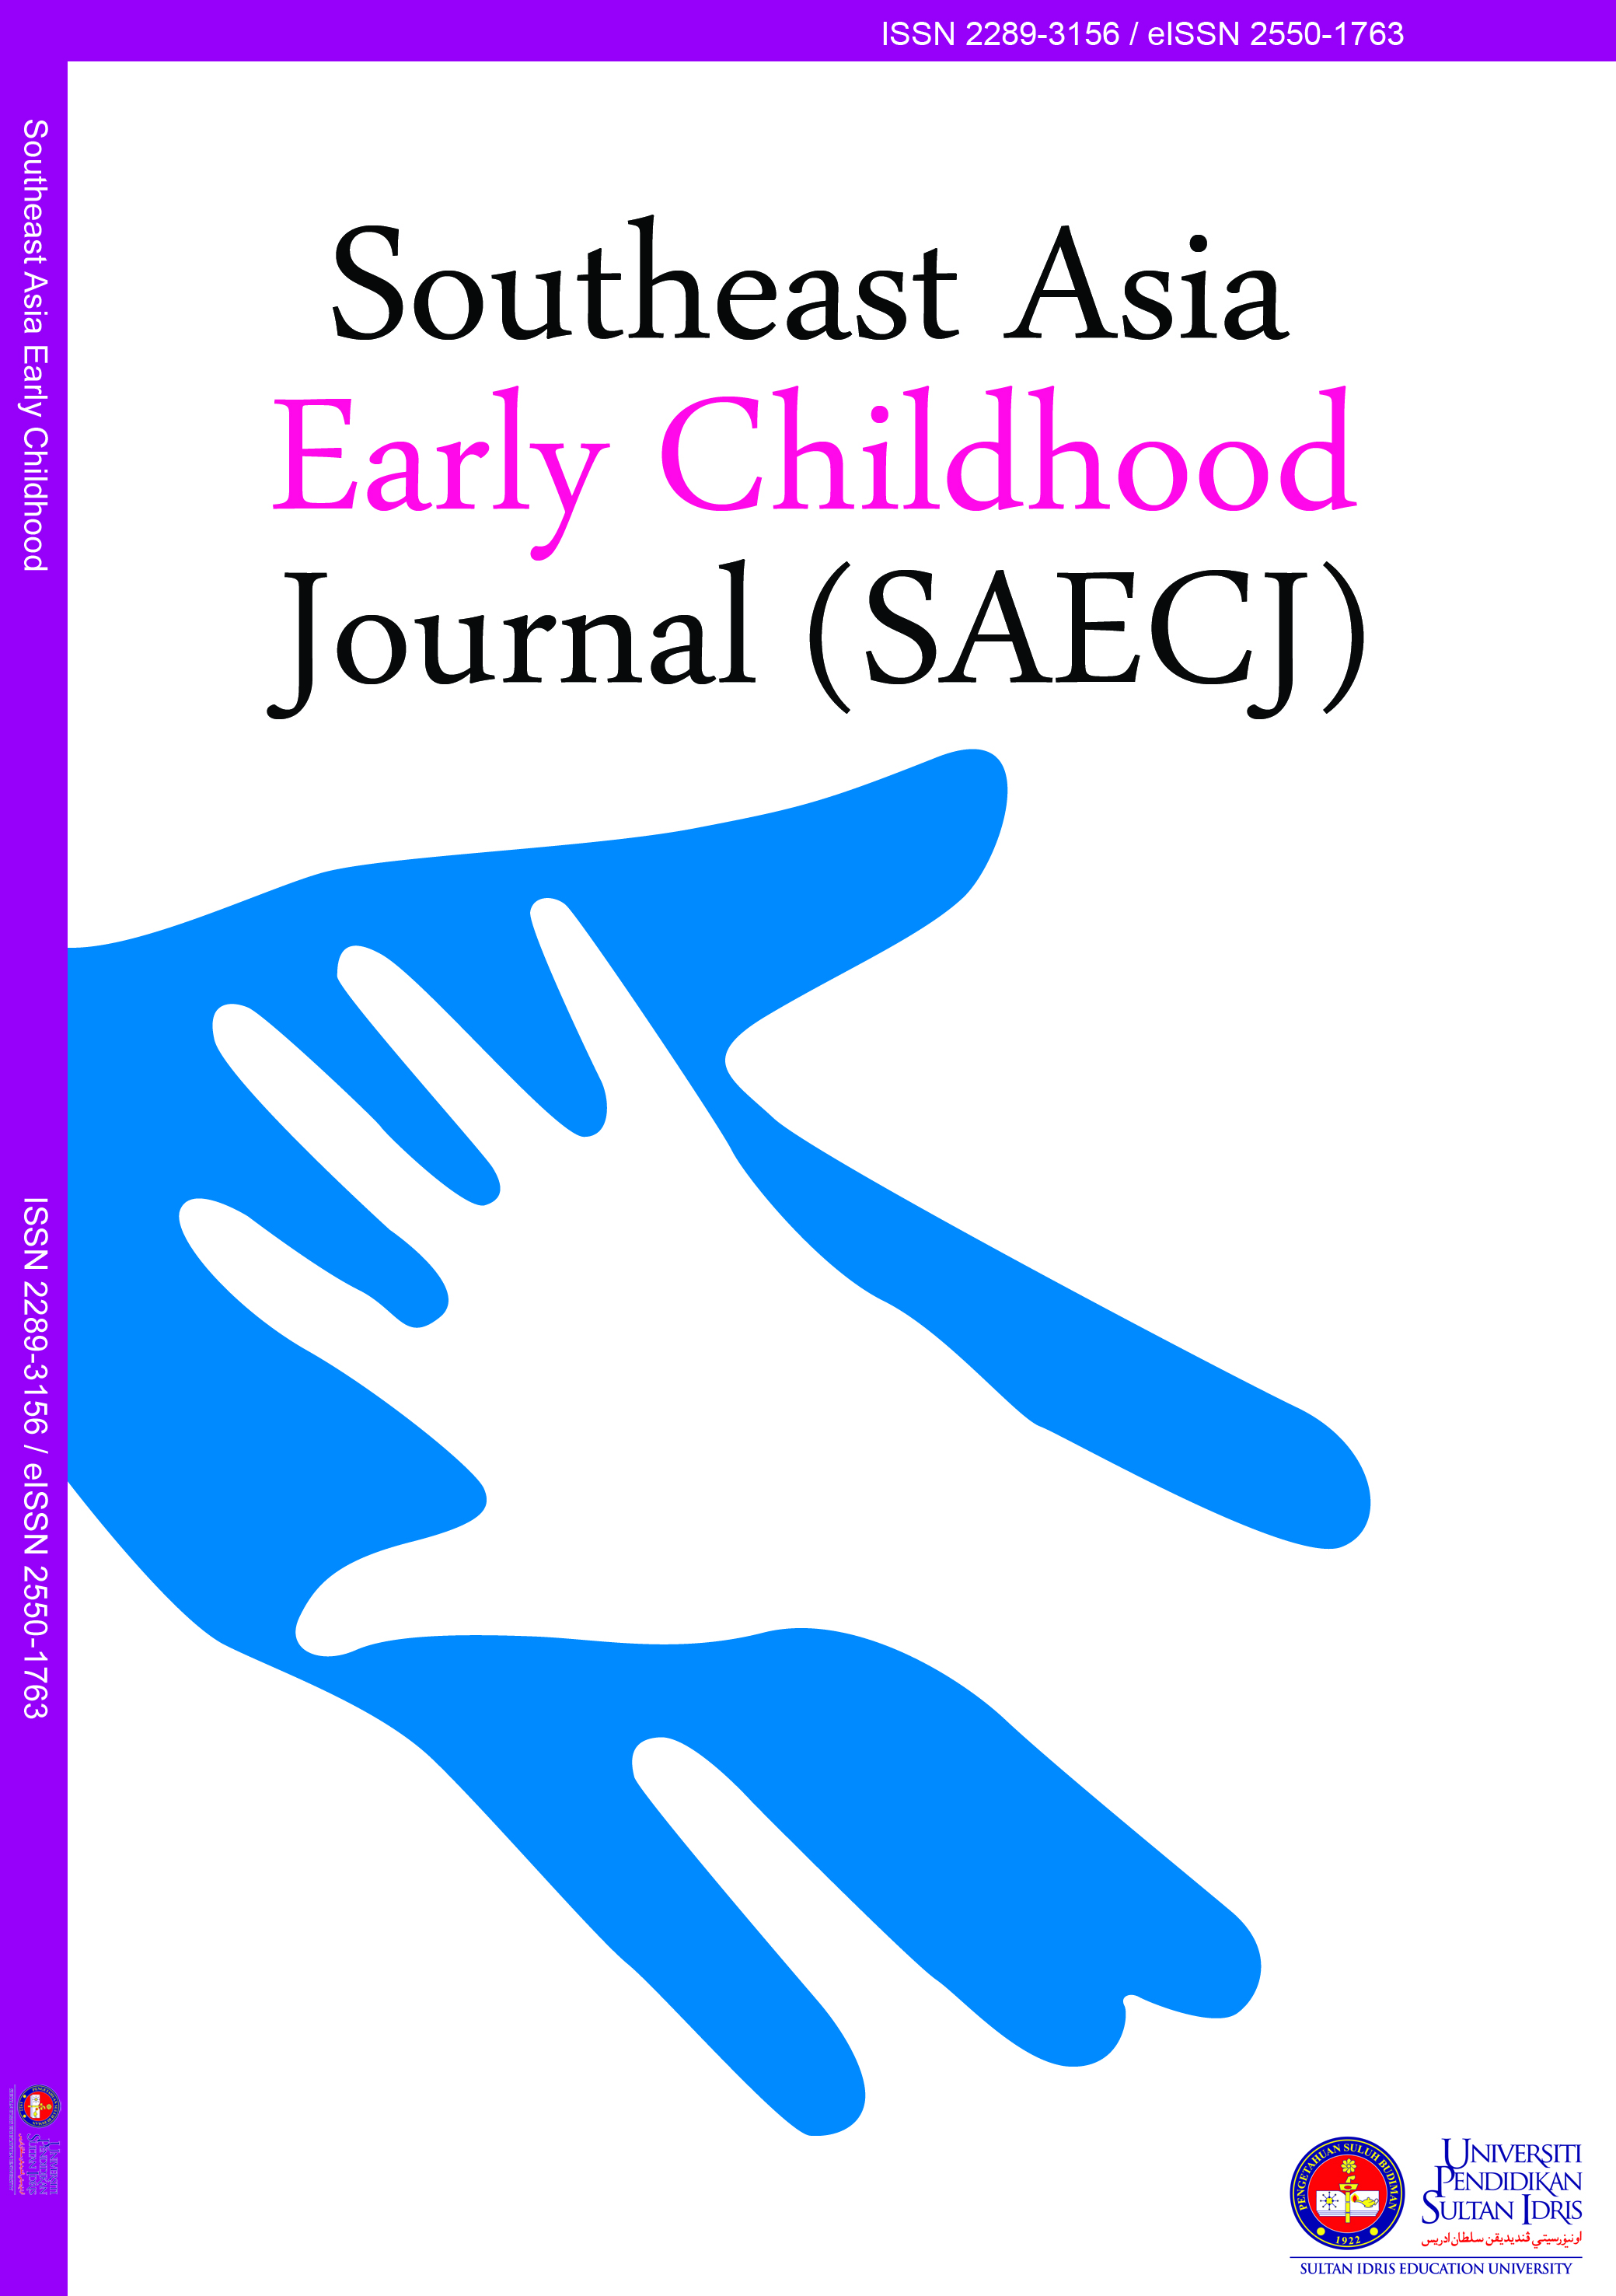 					View Vol. 10 (2021): SPECIAL ISSUE (2021) Southeast Asia Early Childhood Journal (SAECJ)
				